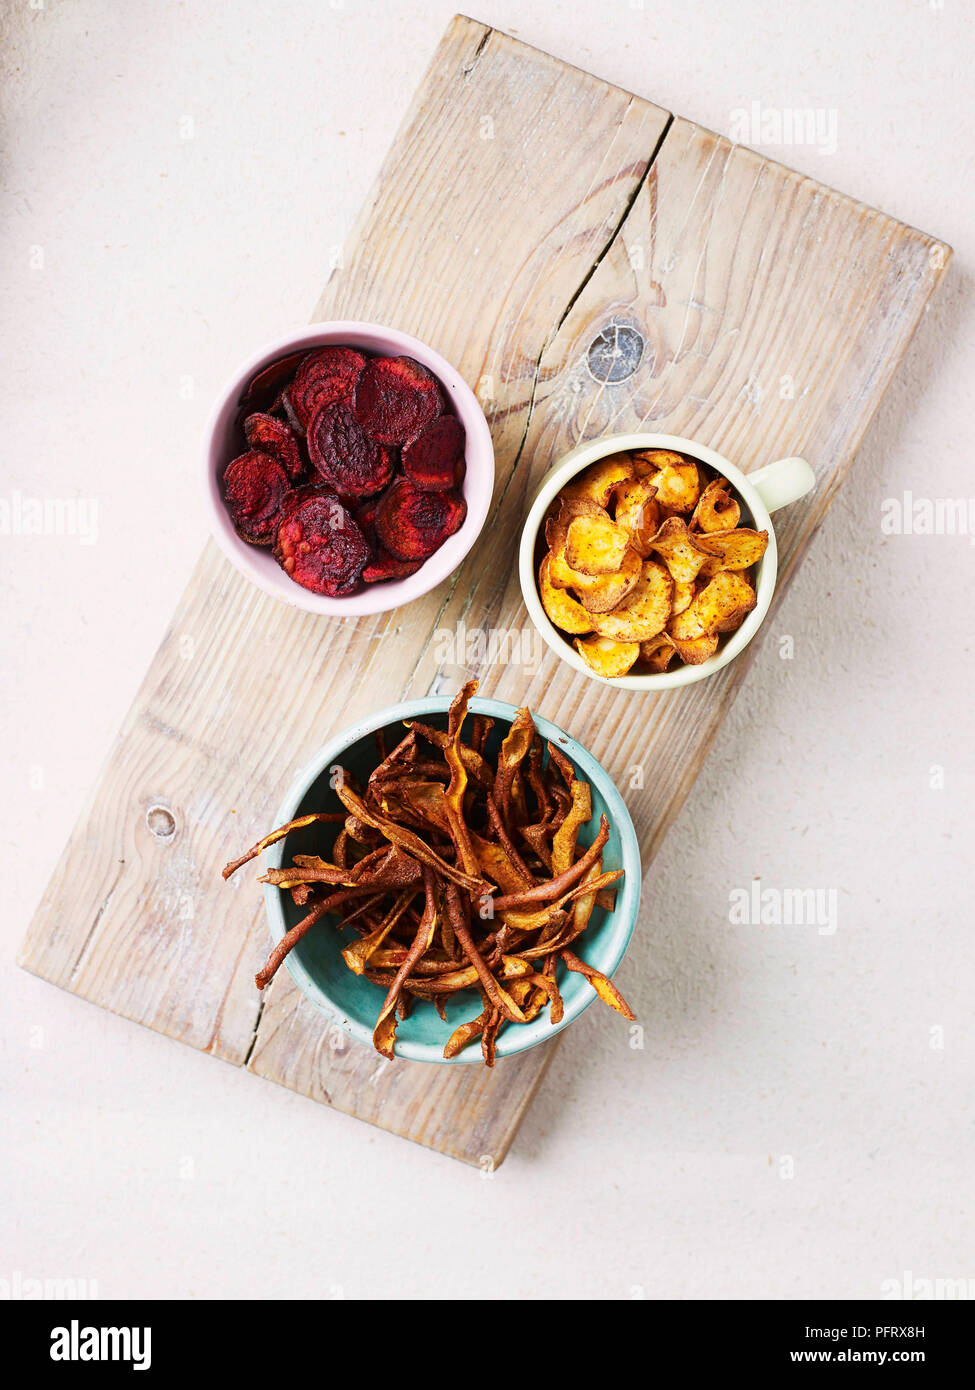 Vegetable crisps (parsnip, beetroot, sweet potato) in bowls on a wooden board Stock Photo